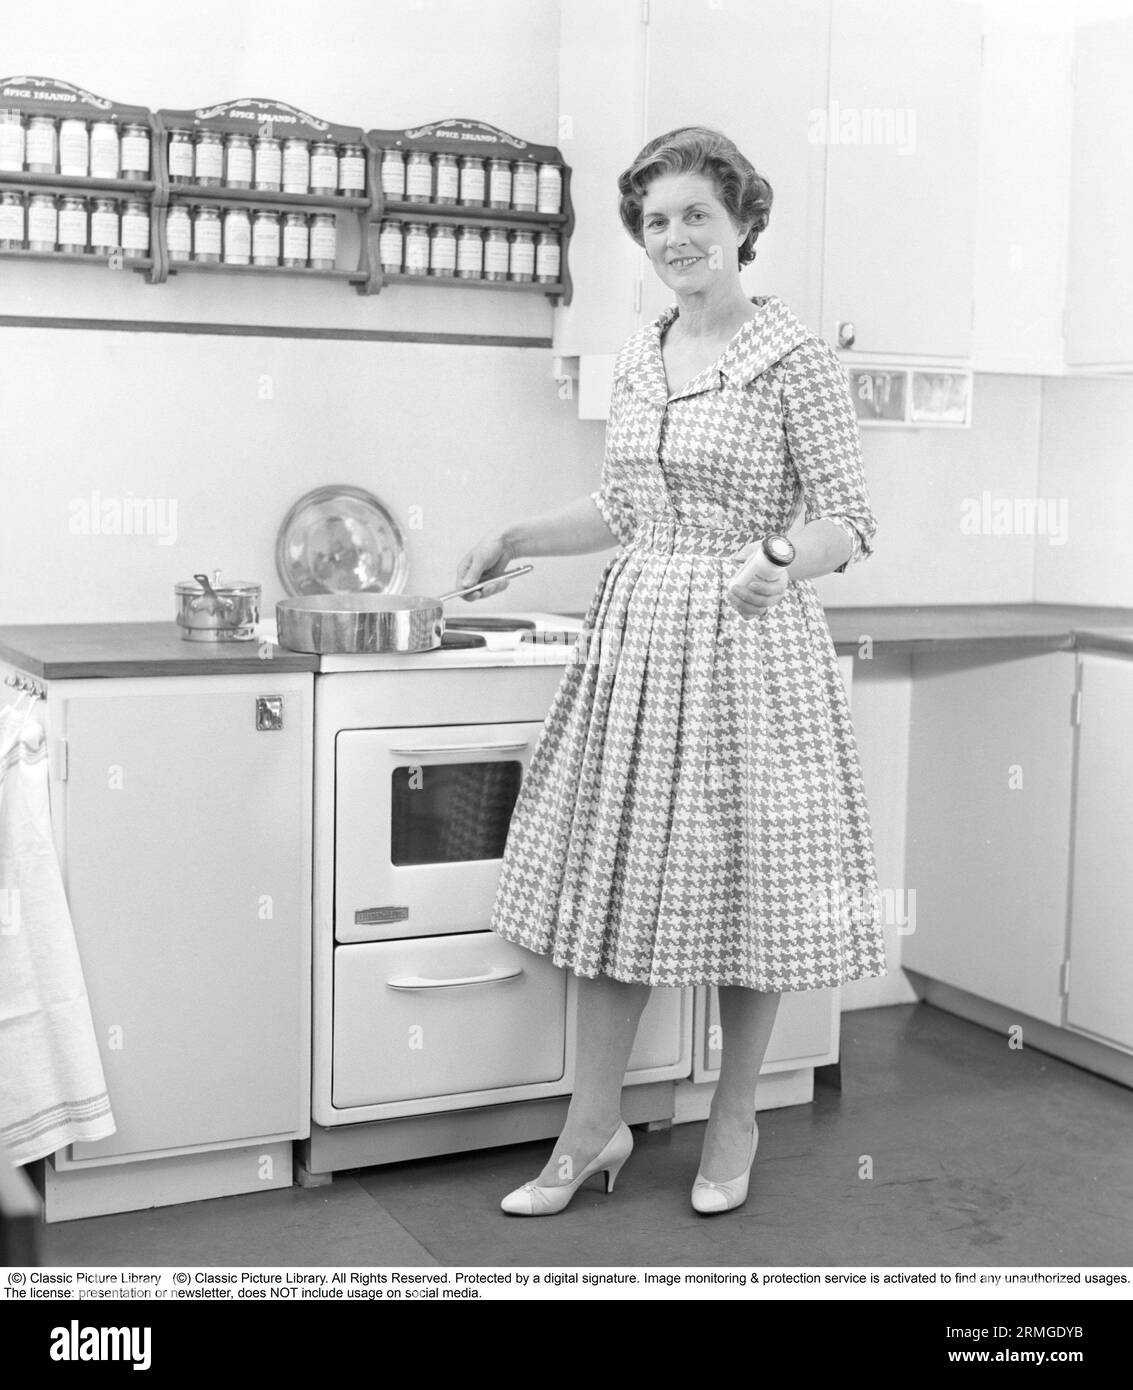 In the 1950s. A woman in a typical 1950s kitchen with wooden cabinets and a set of spices on shelfes above the cooker. She has a saucepan on the stove but nothing is cooking in it. Sweden 1959. Kristoffersson ref CE103-6 Stock Photo